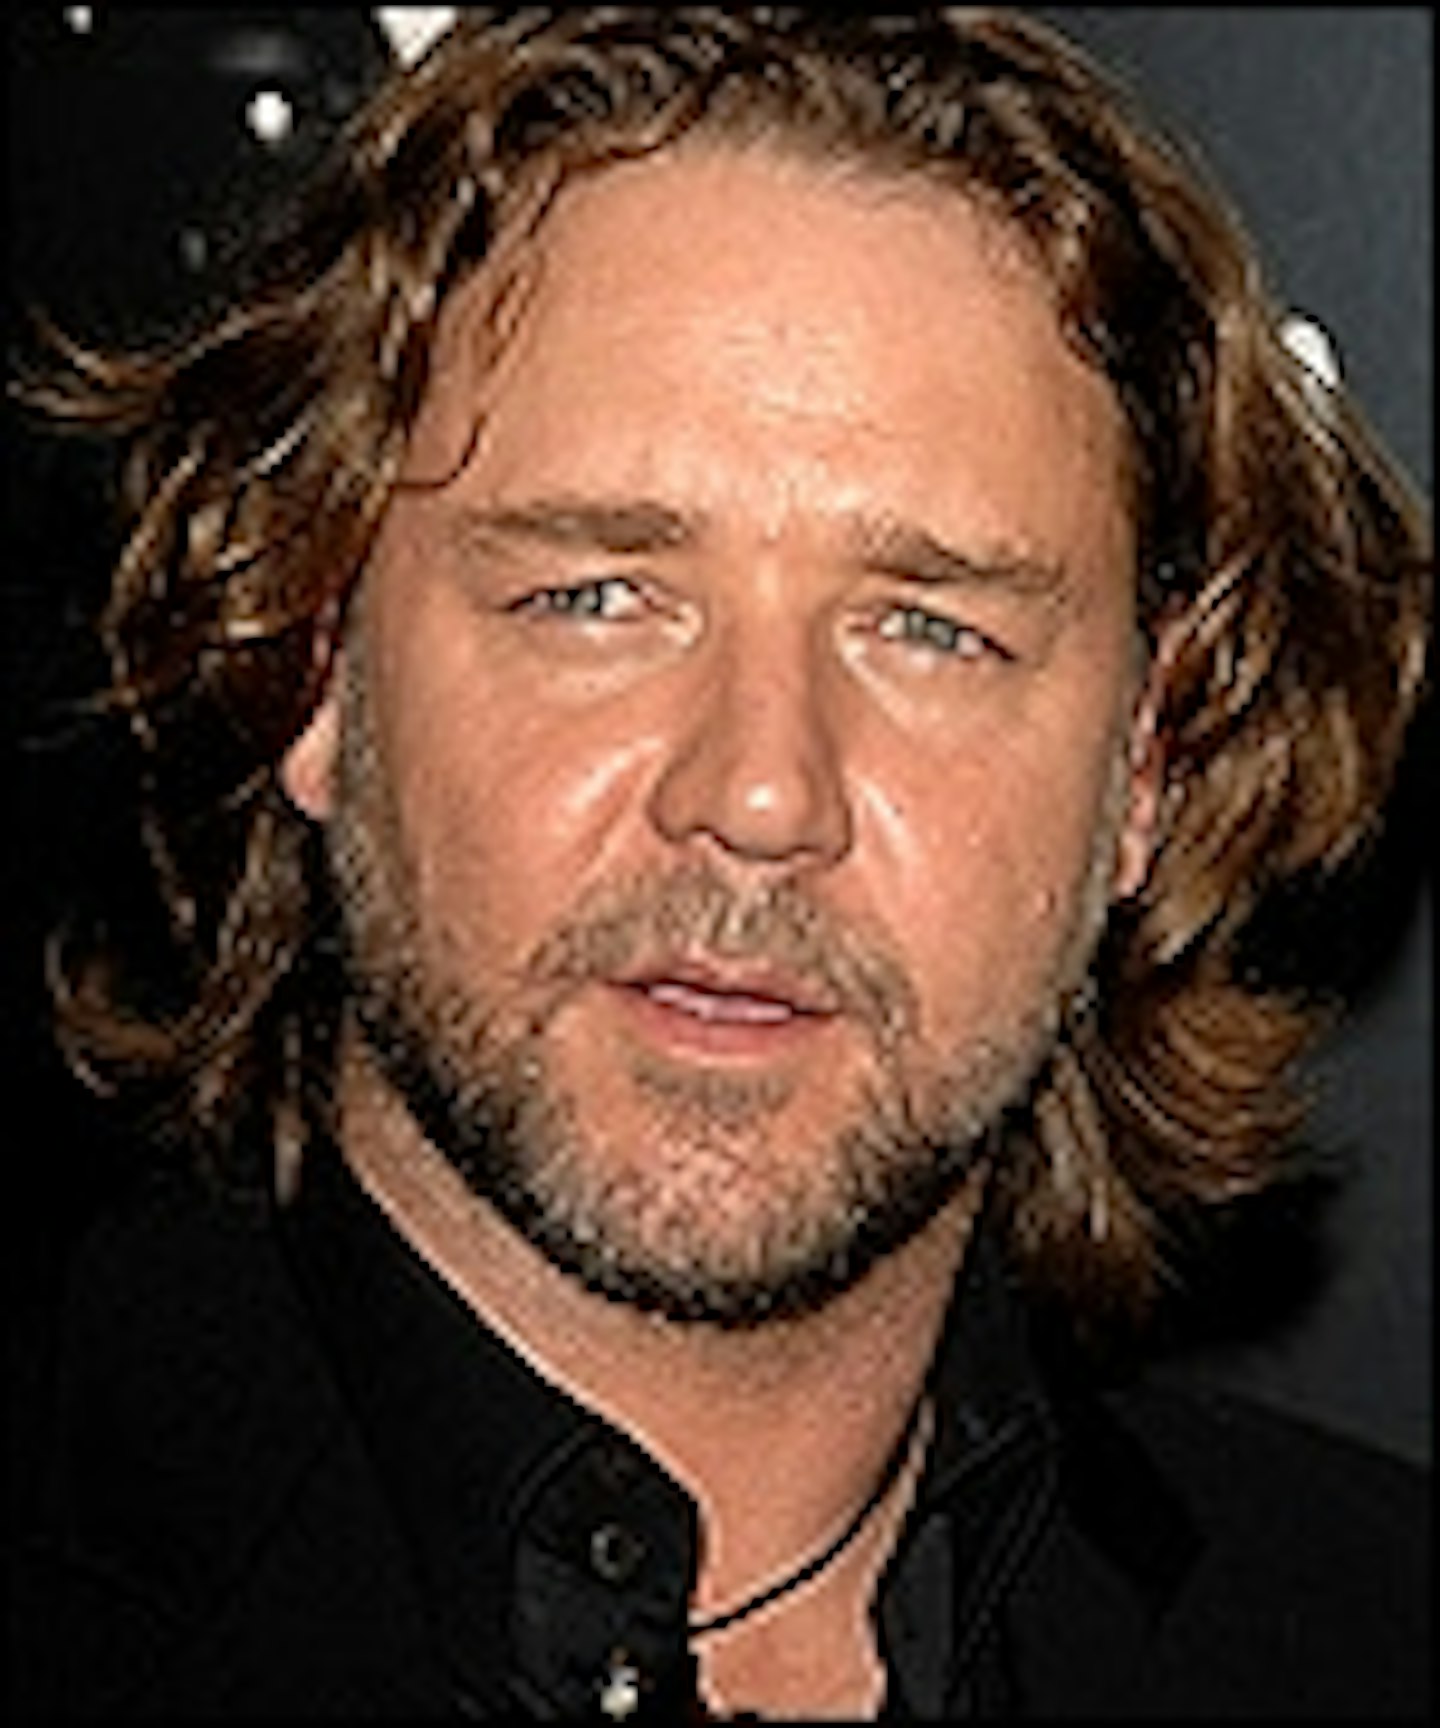 Russell Crowe: Kung Fu Fighter?